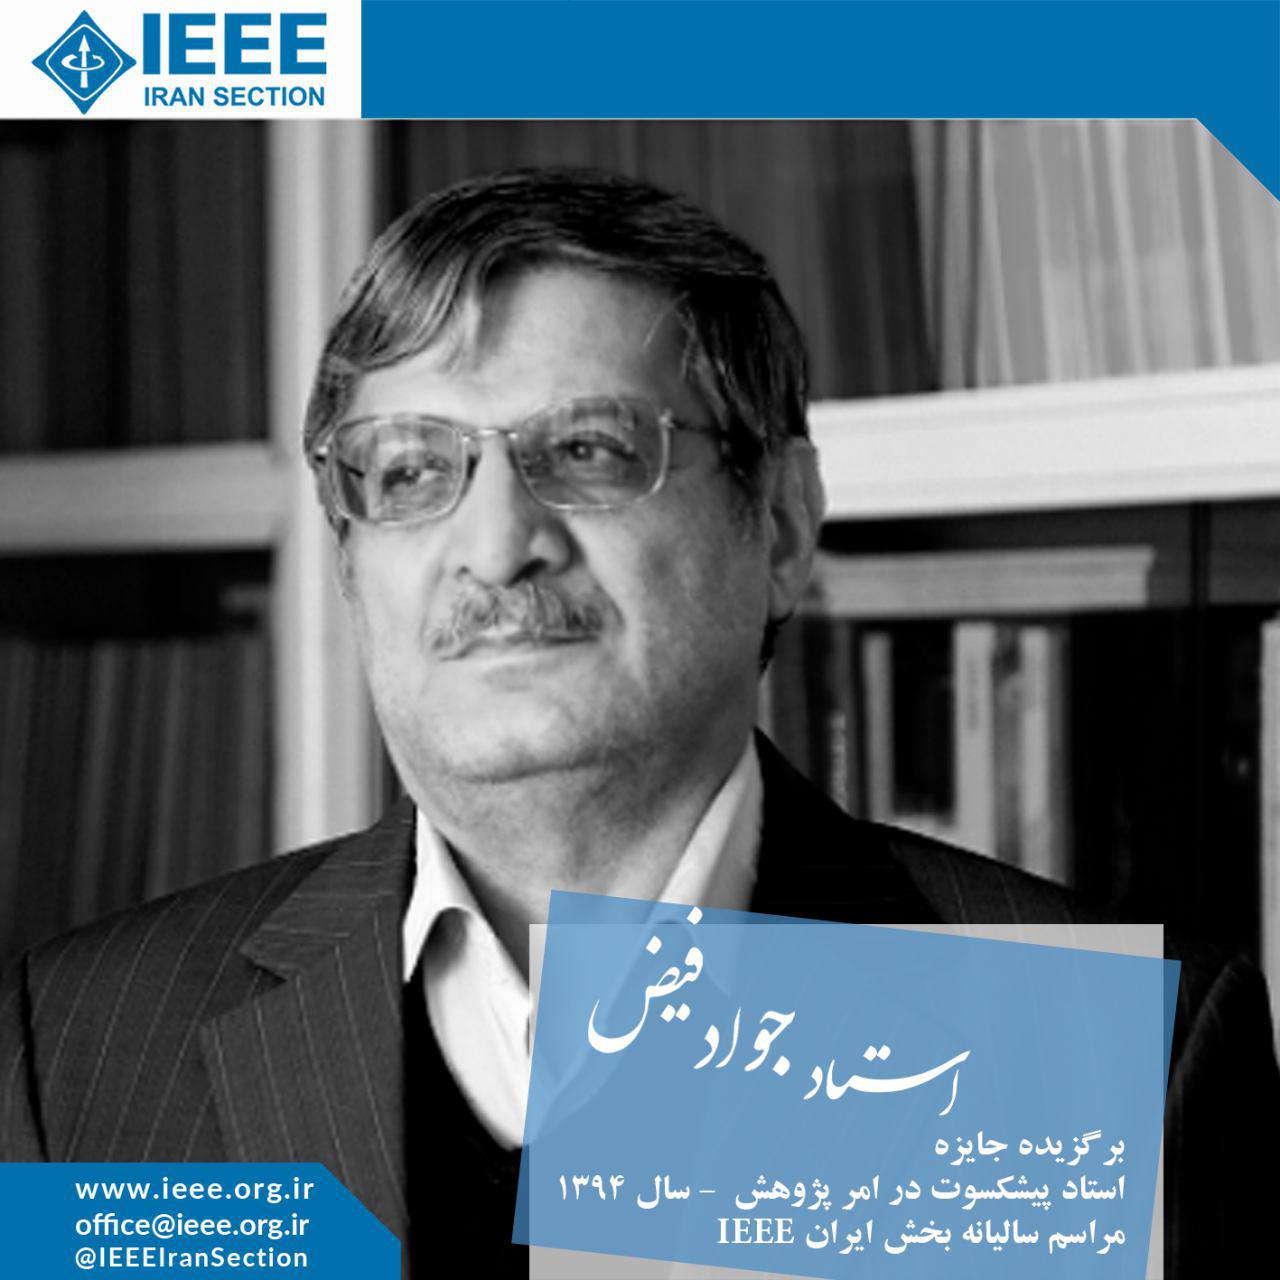 IEEE Iran Section